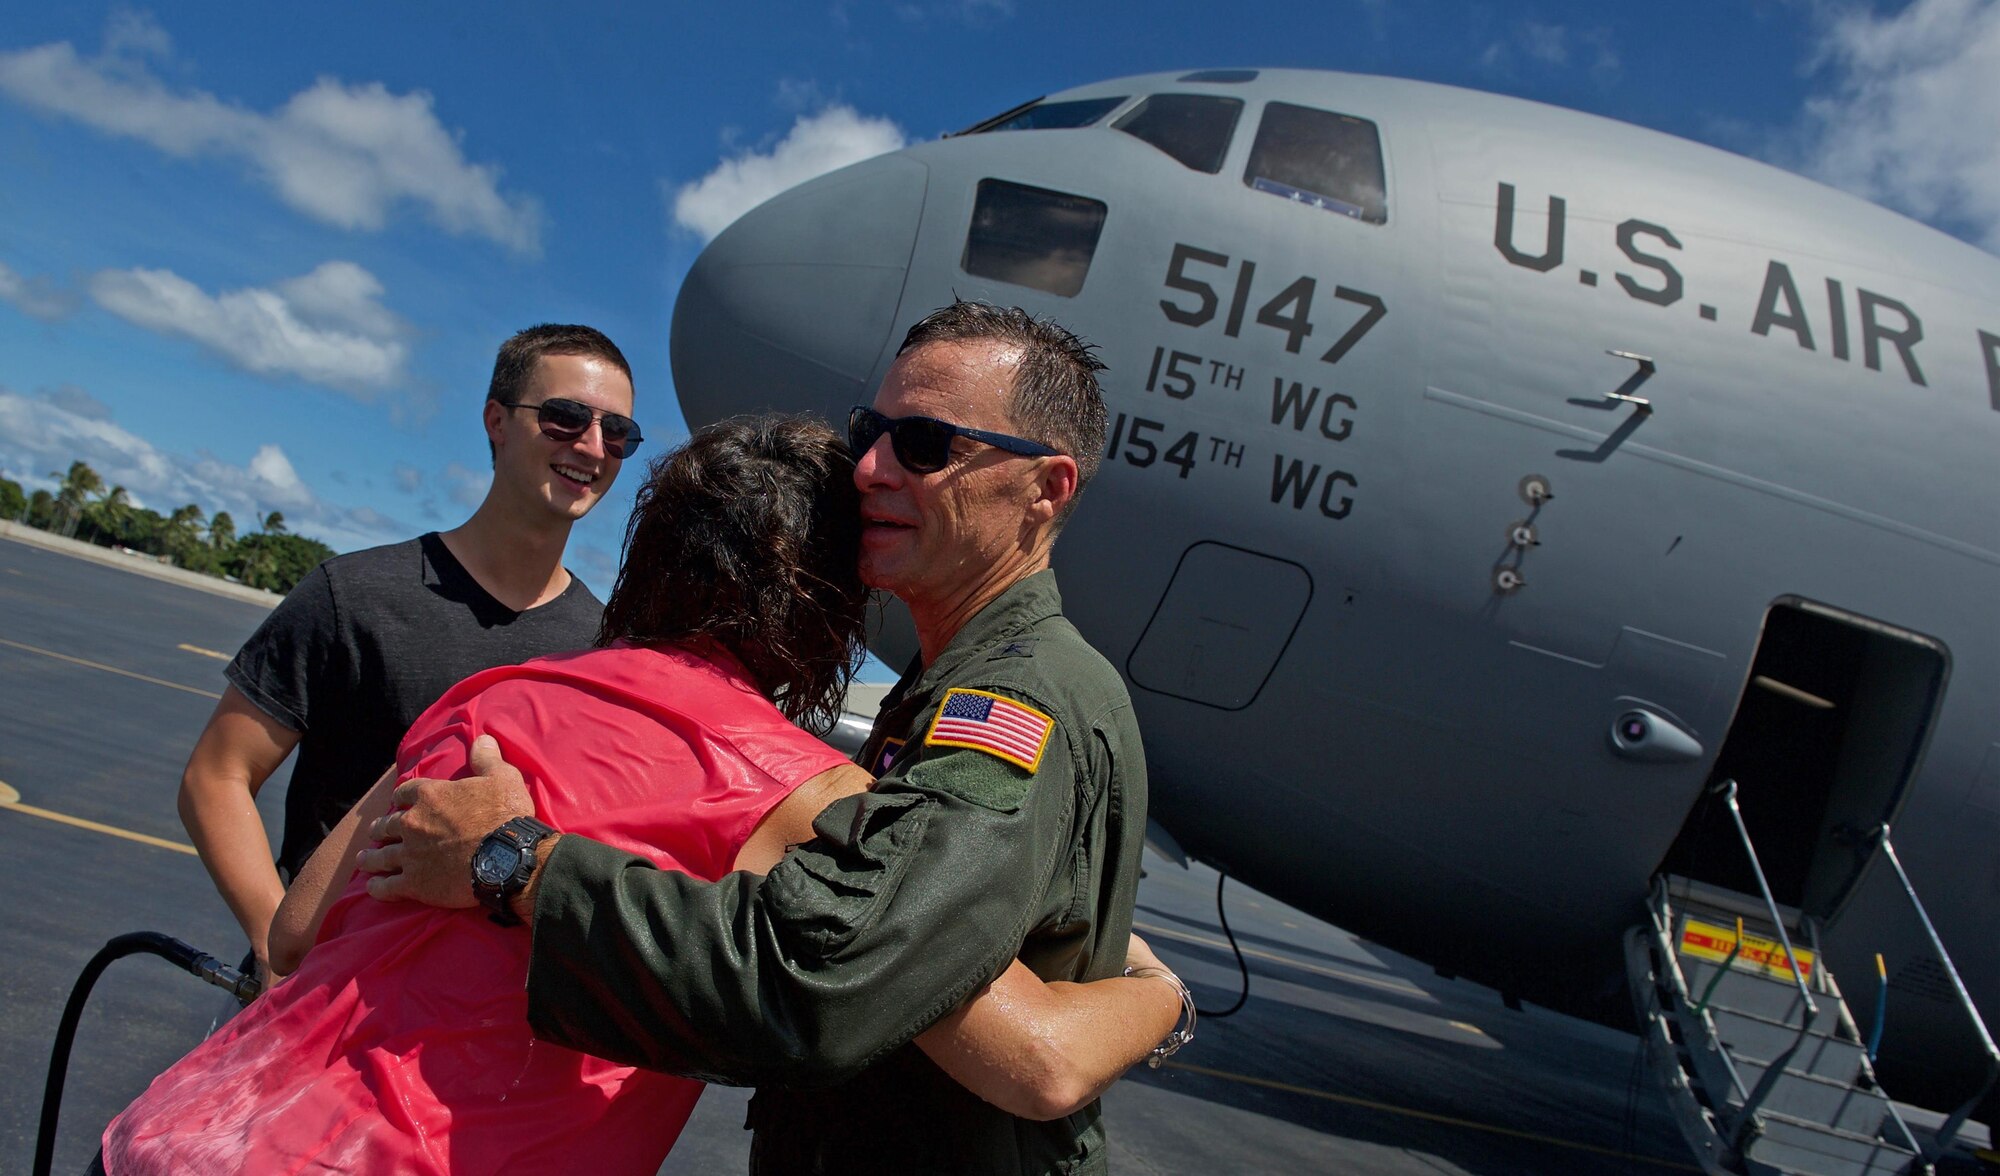 U.S. Air Force Maj. Gen. Mark Dillon, Pacific Air Forces vice commander, is greeted by family and friends and soaked in water and champagne moments after his C-17 fini-flight at Joint Base Pearl Harbor-Hickam, Hawaii, June 12, 2017. With Dillon's retirement approaching, the fini-flight is the capstone event of his flying career. (U.S. Air Force photo/Tech. Sgt. Kamaile Chan)